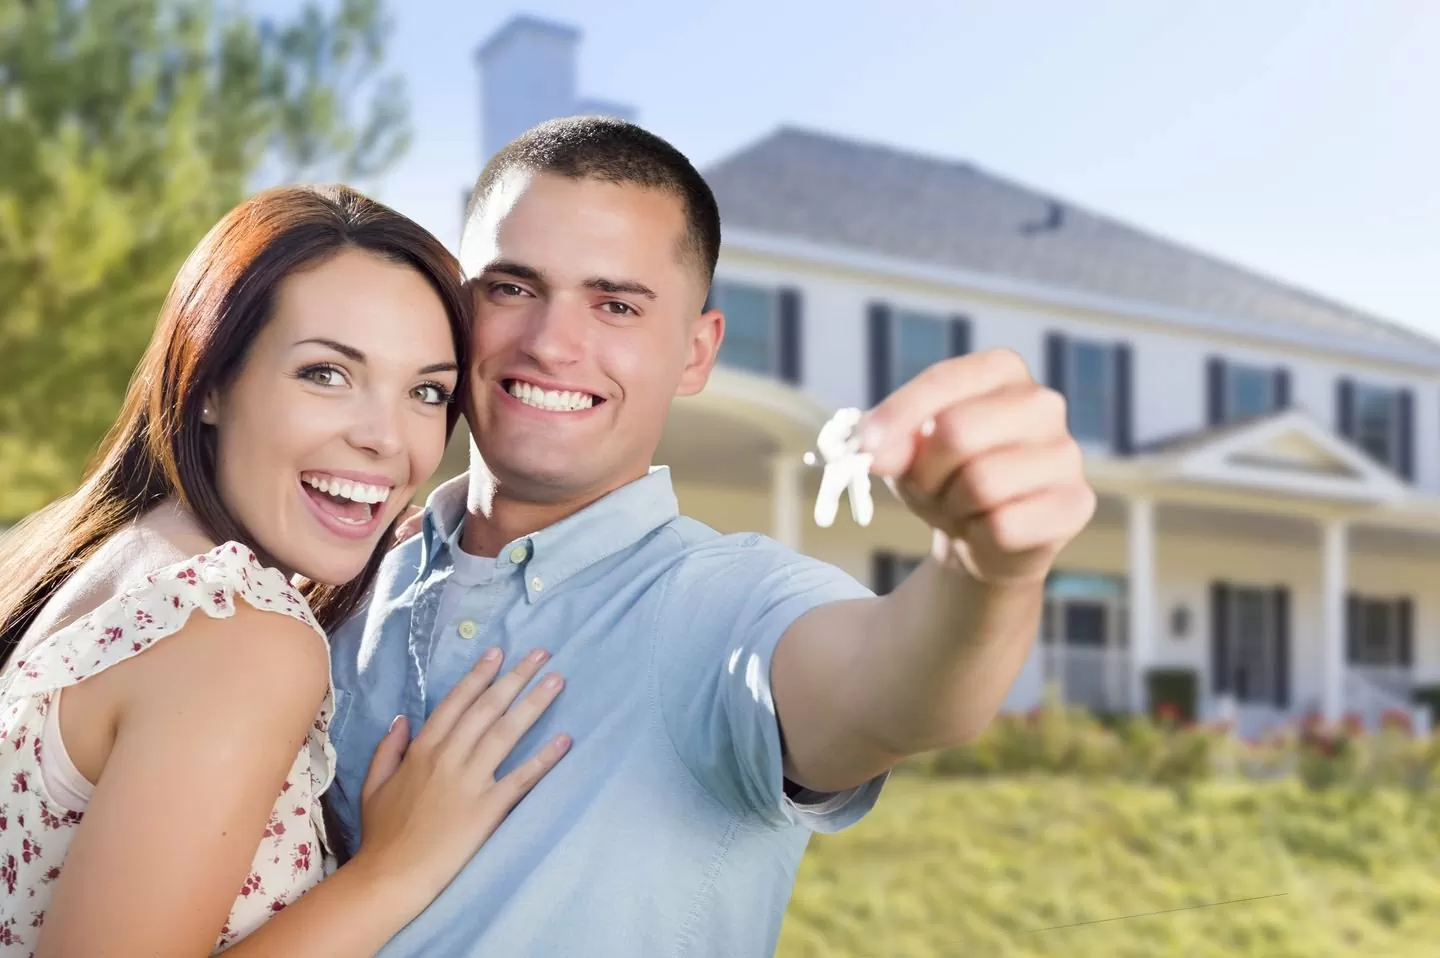 first-time homebuyer tips